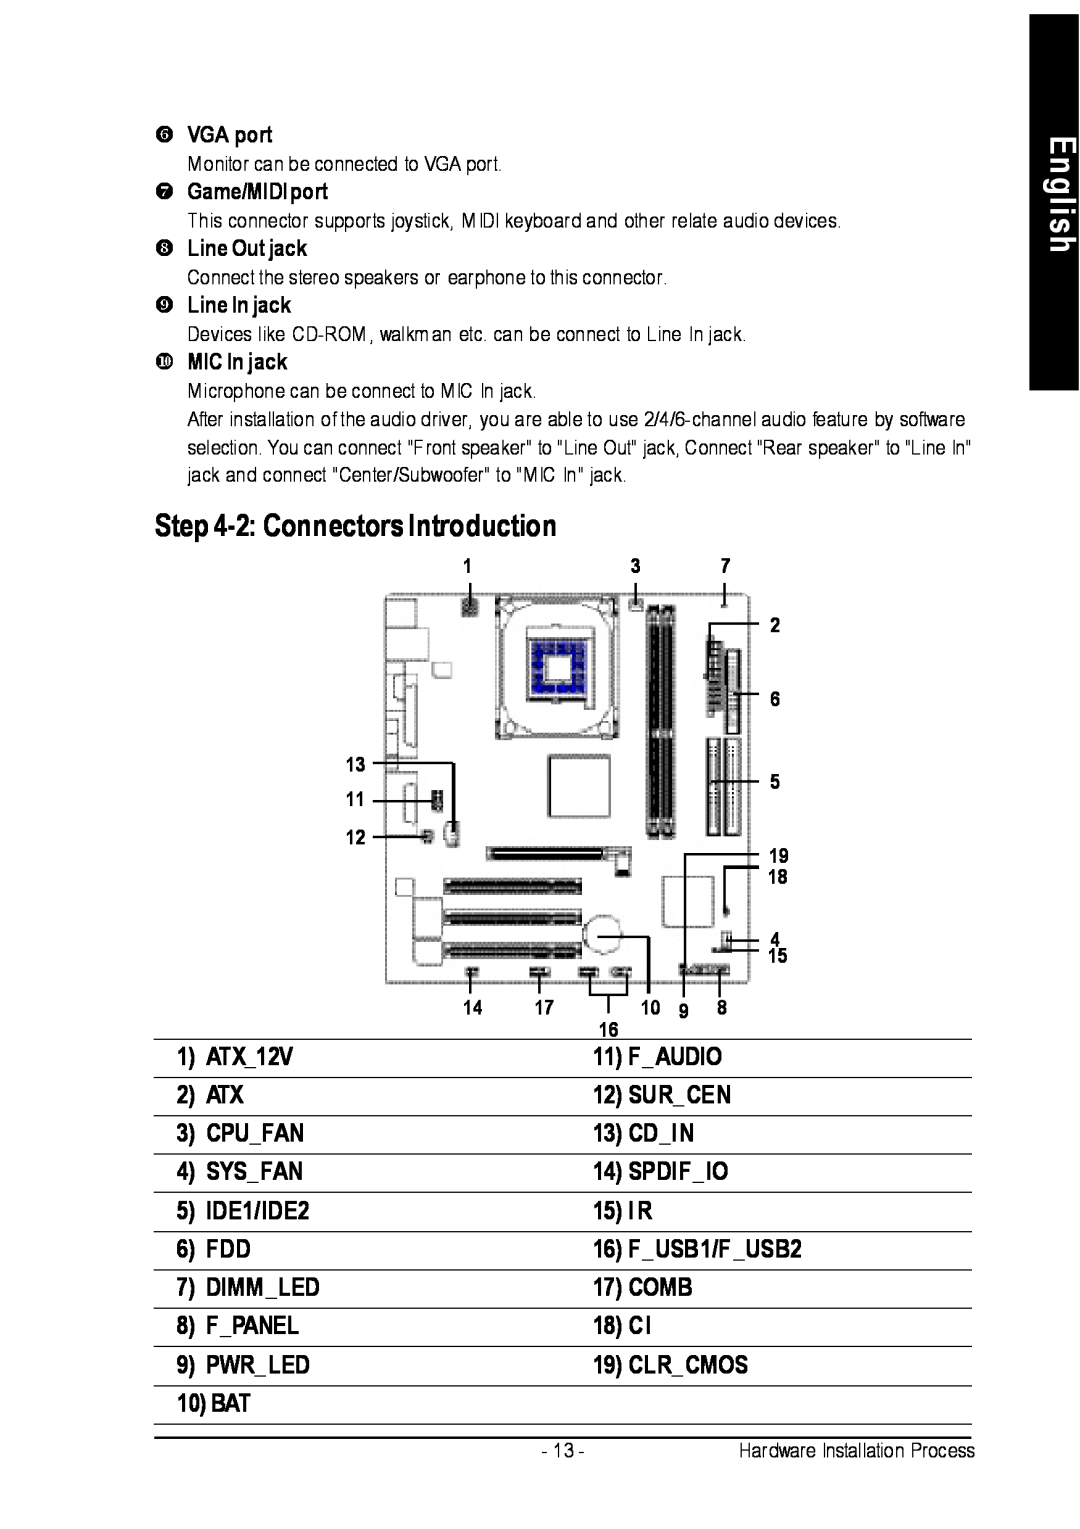 Intel 8S651M-RZ-C user manual 2 Connectors Introduction, English 